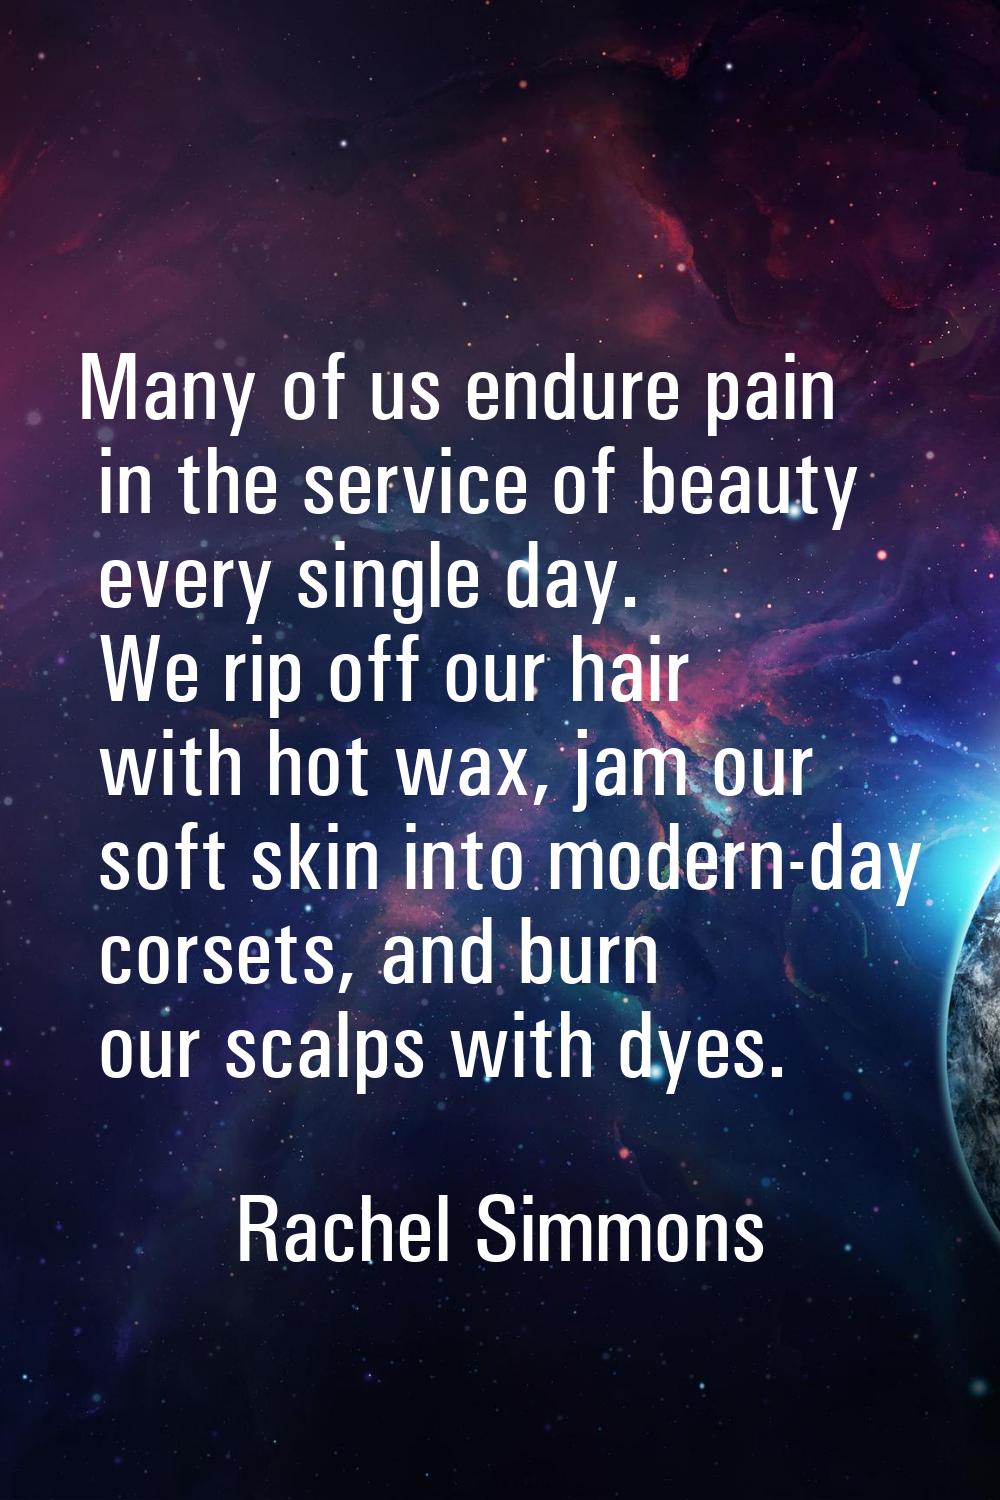 Many of us endure pain in the service of beauty every single day. We rip off our hair with hot wax,